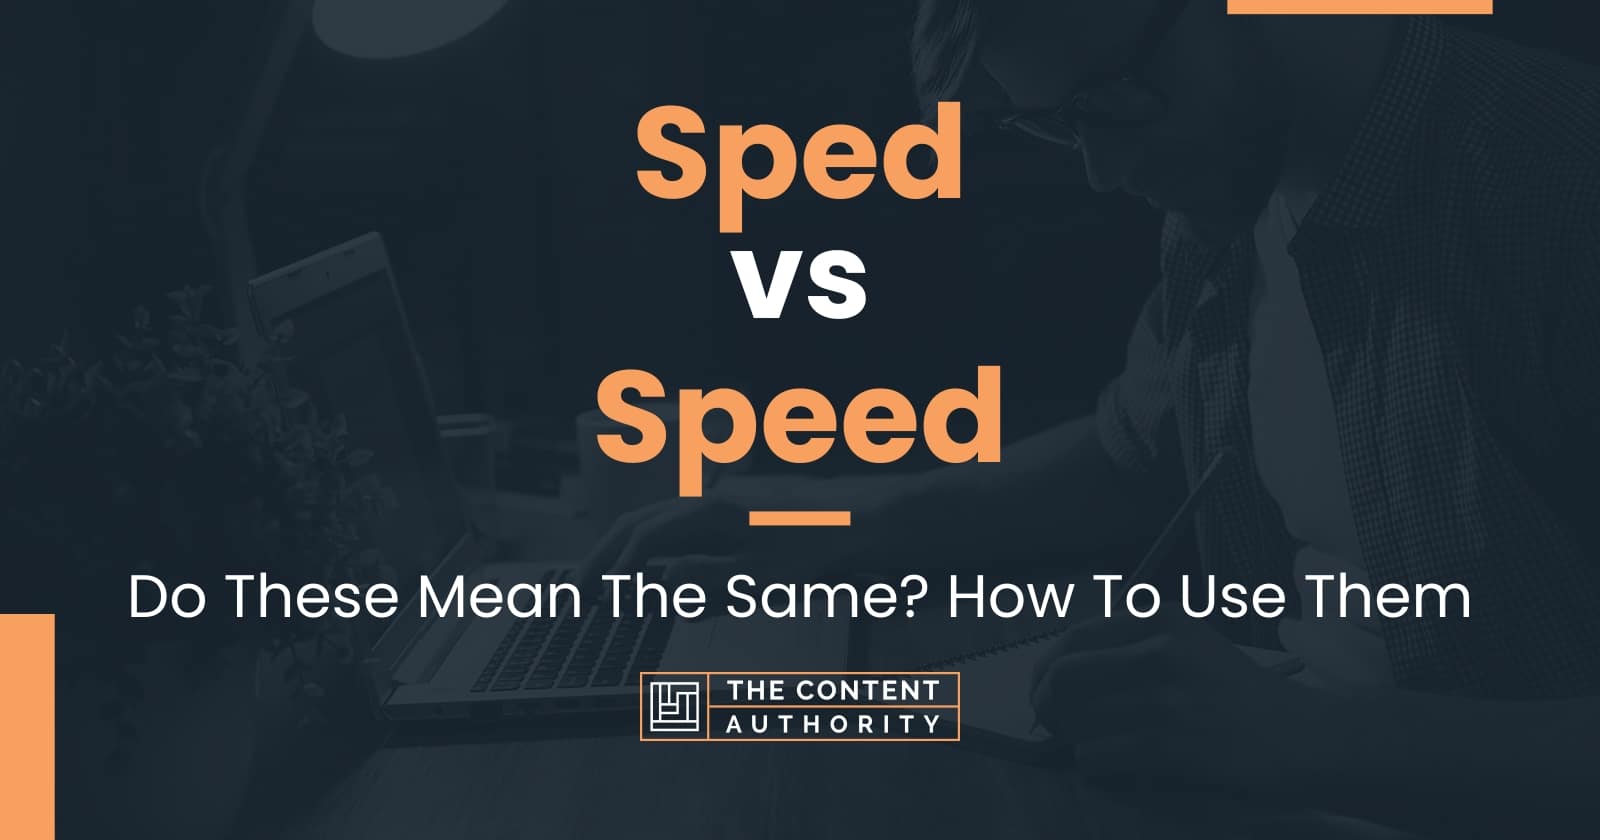 Sped vs Speed: Do These Mean The Same? How To Use Them